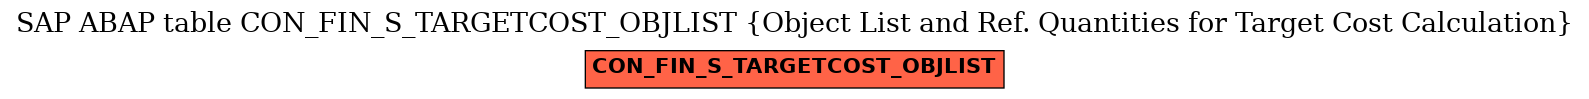 E-R Diagram for table CON_FIN_S_TARGETCOST_OBJLIST (Object List and Ref. Quantities for Target Cost Calculation)